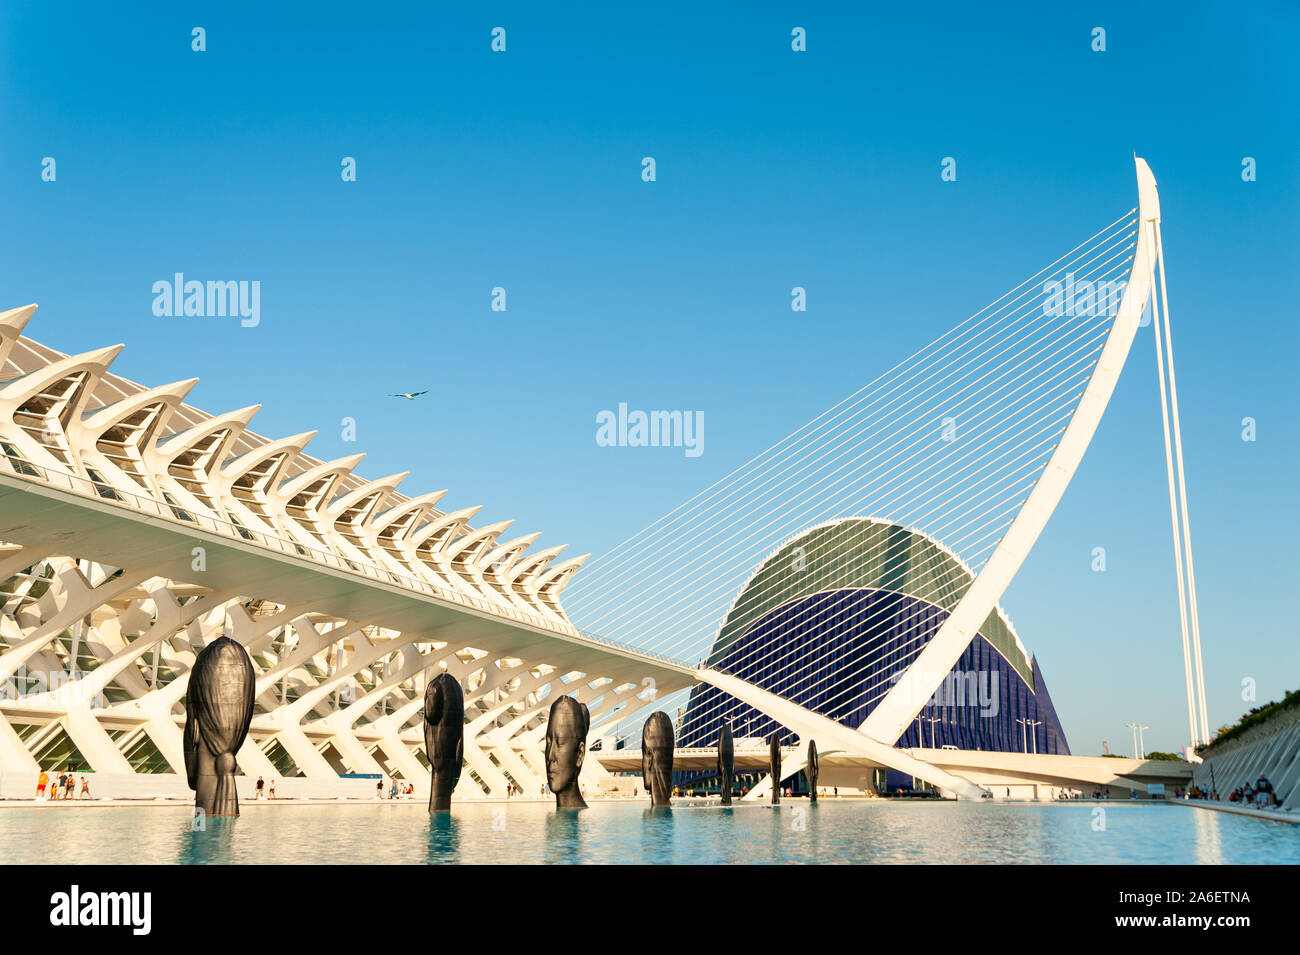 view of city of arts and sciences with Pont de l'Assut de l'Or and Agora in background, and pool at sunset, in valencia, spain Stock Photo